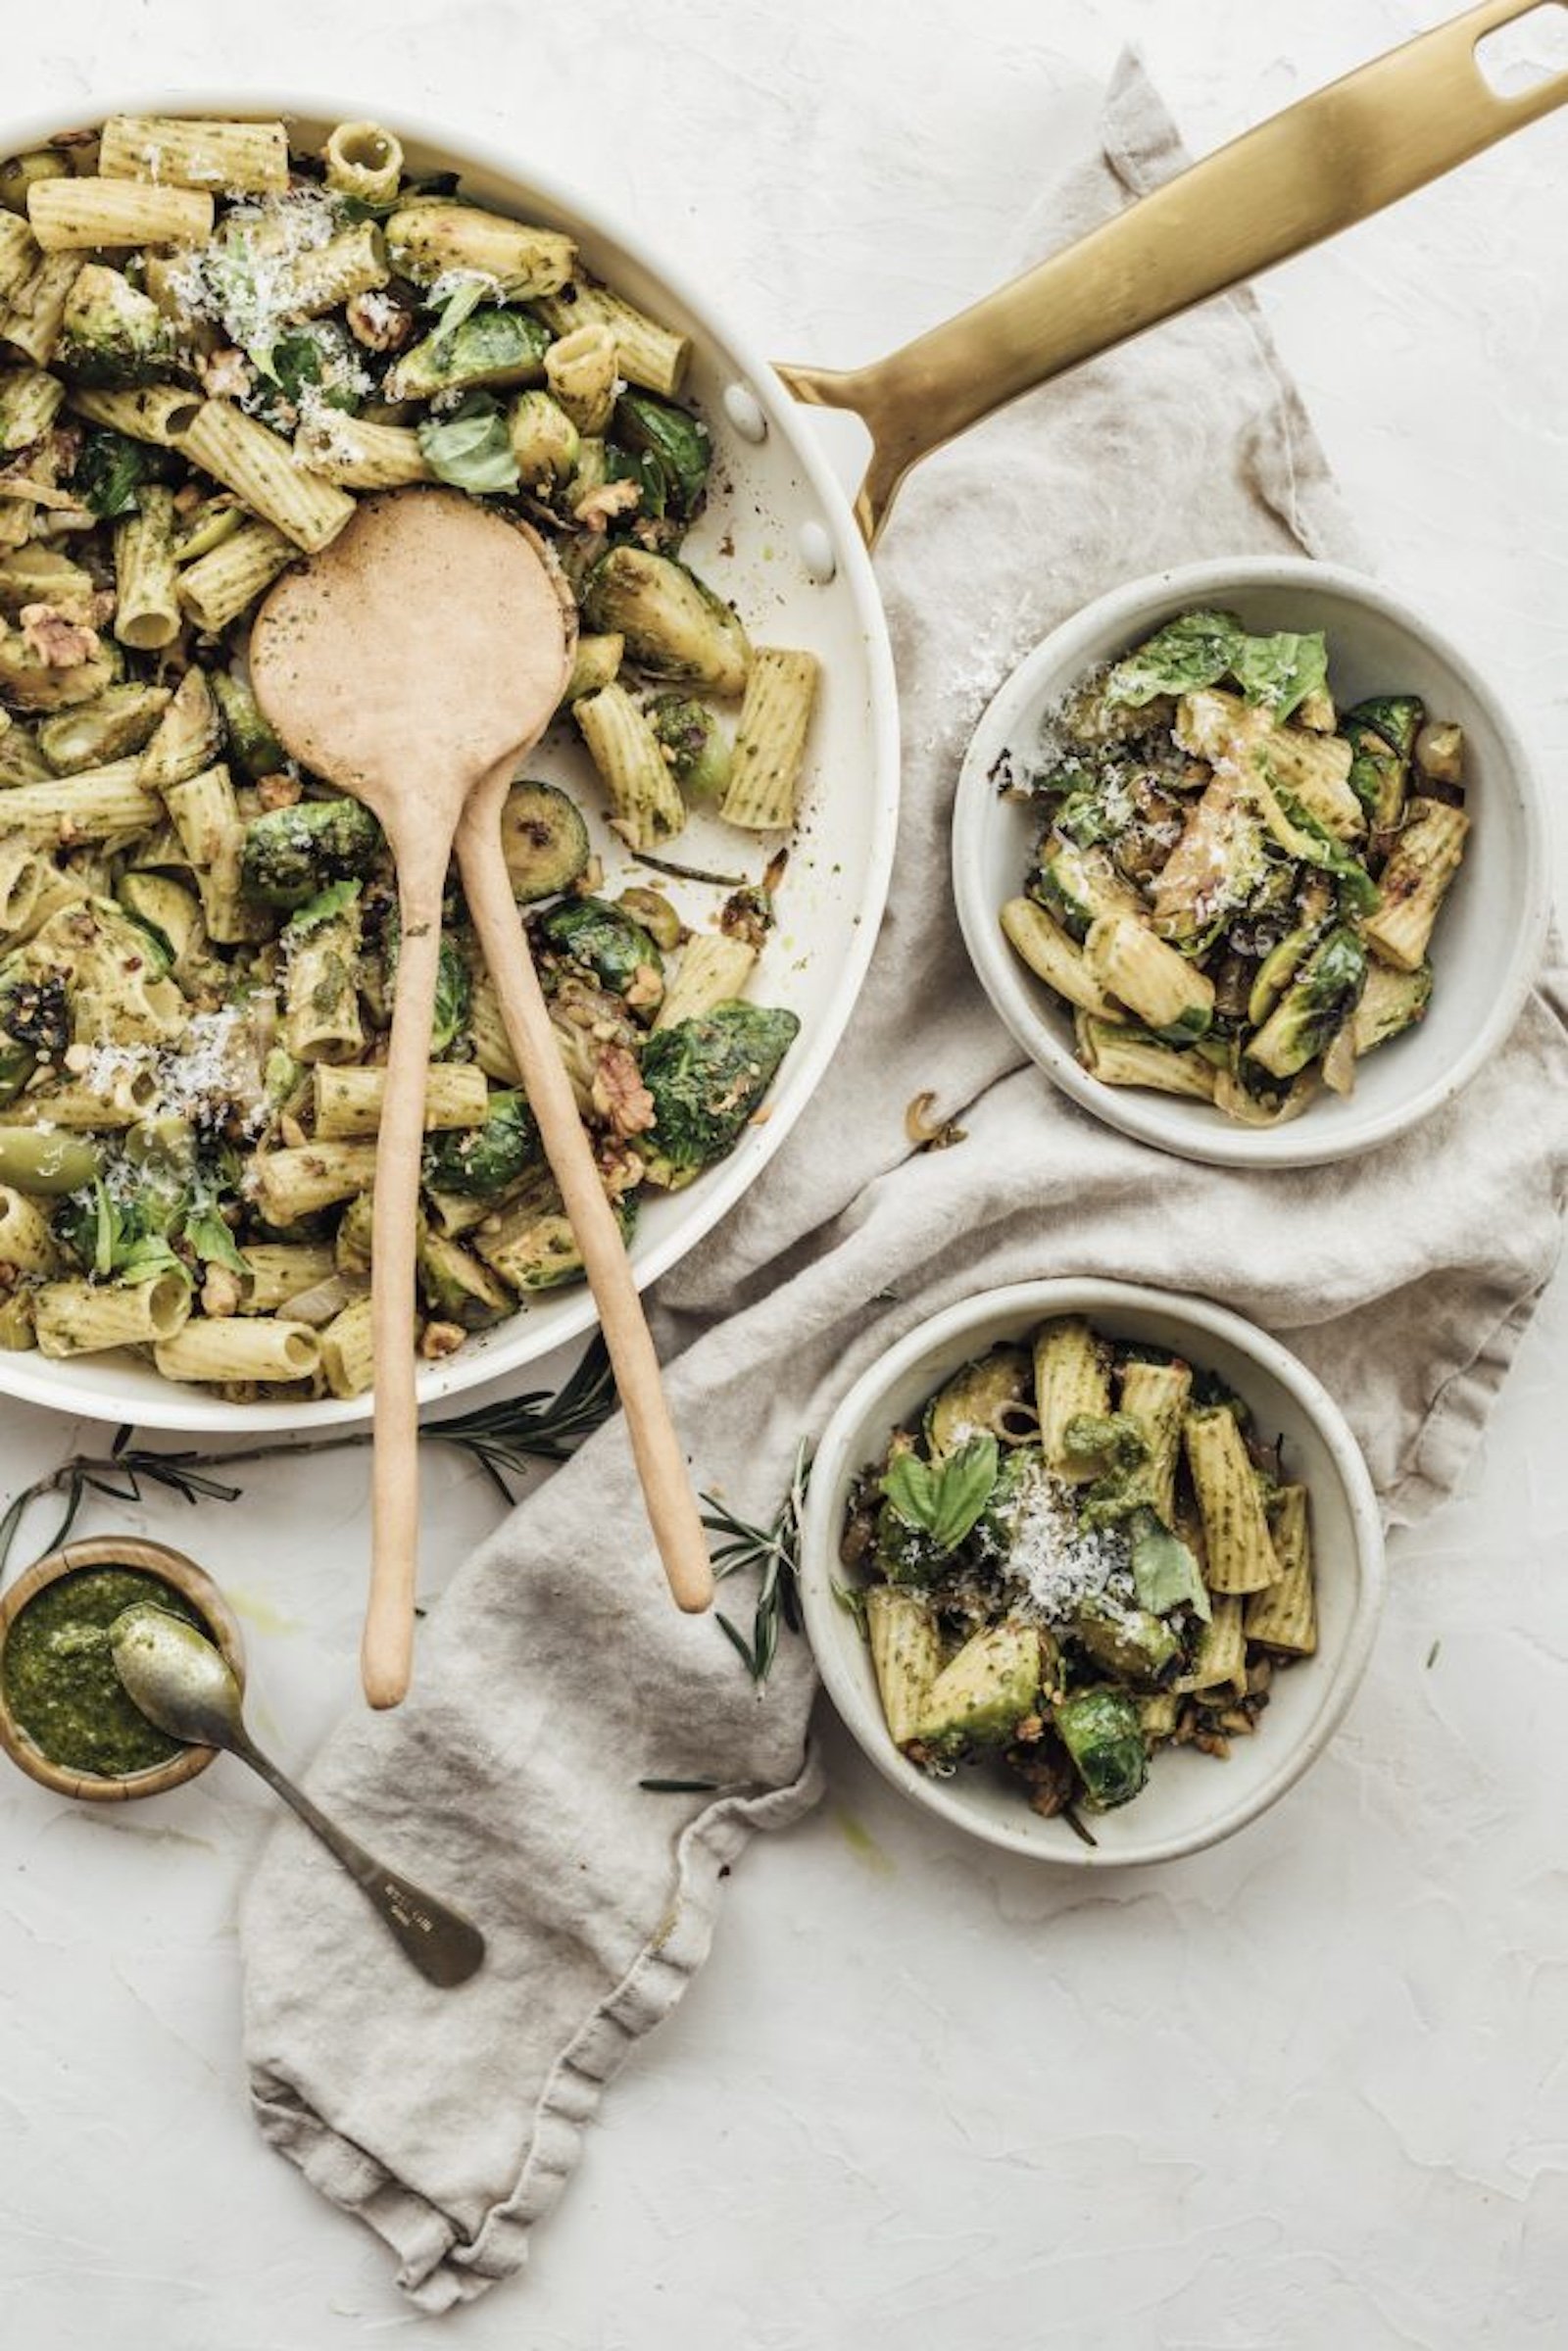 rigantoni with brussels sprouts and kale pesto